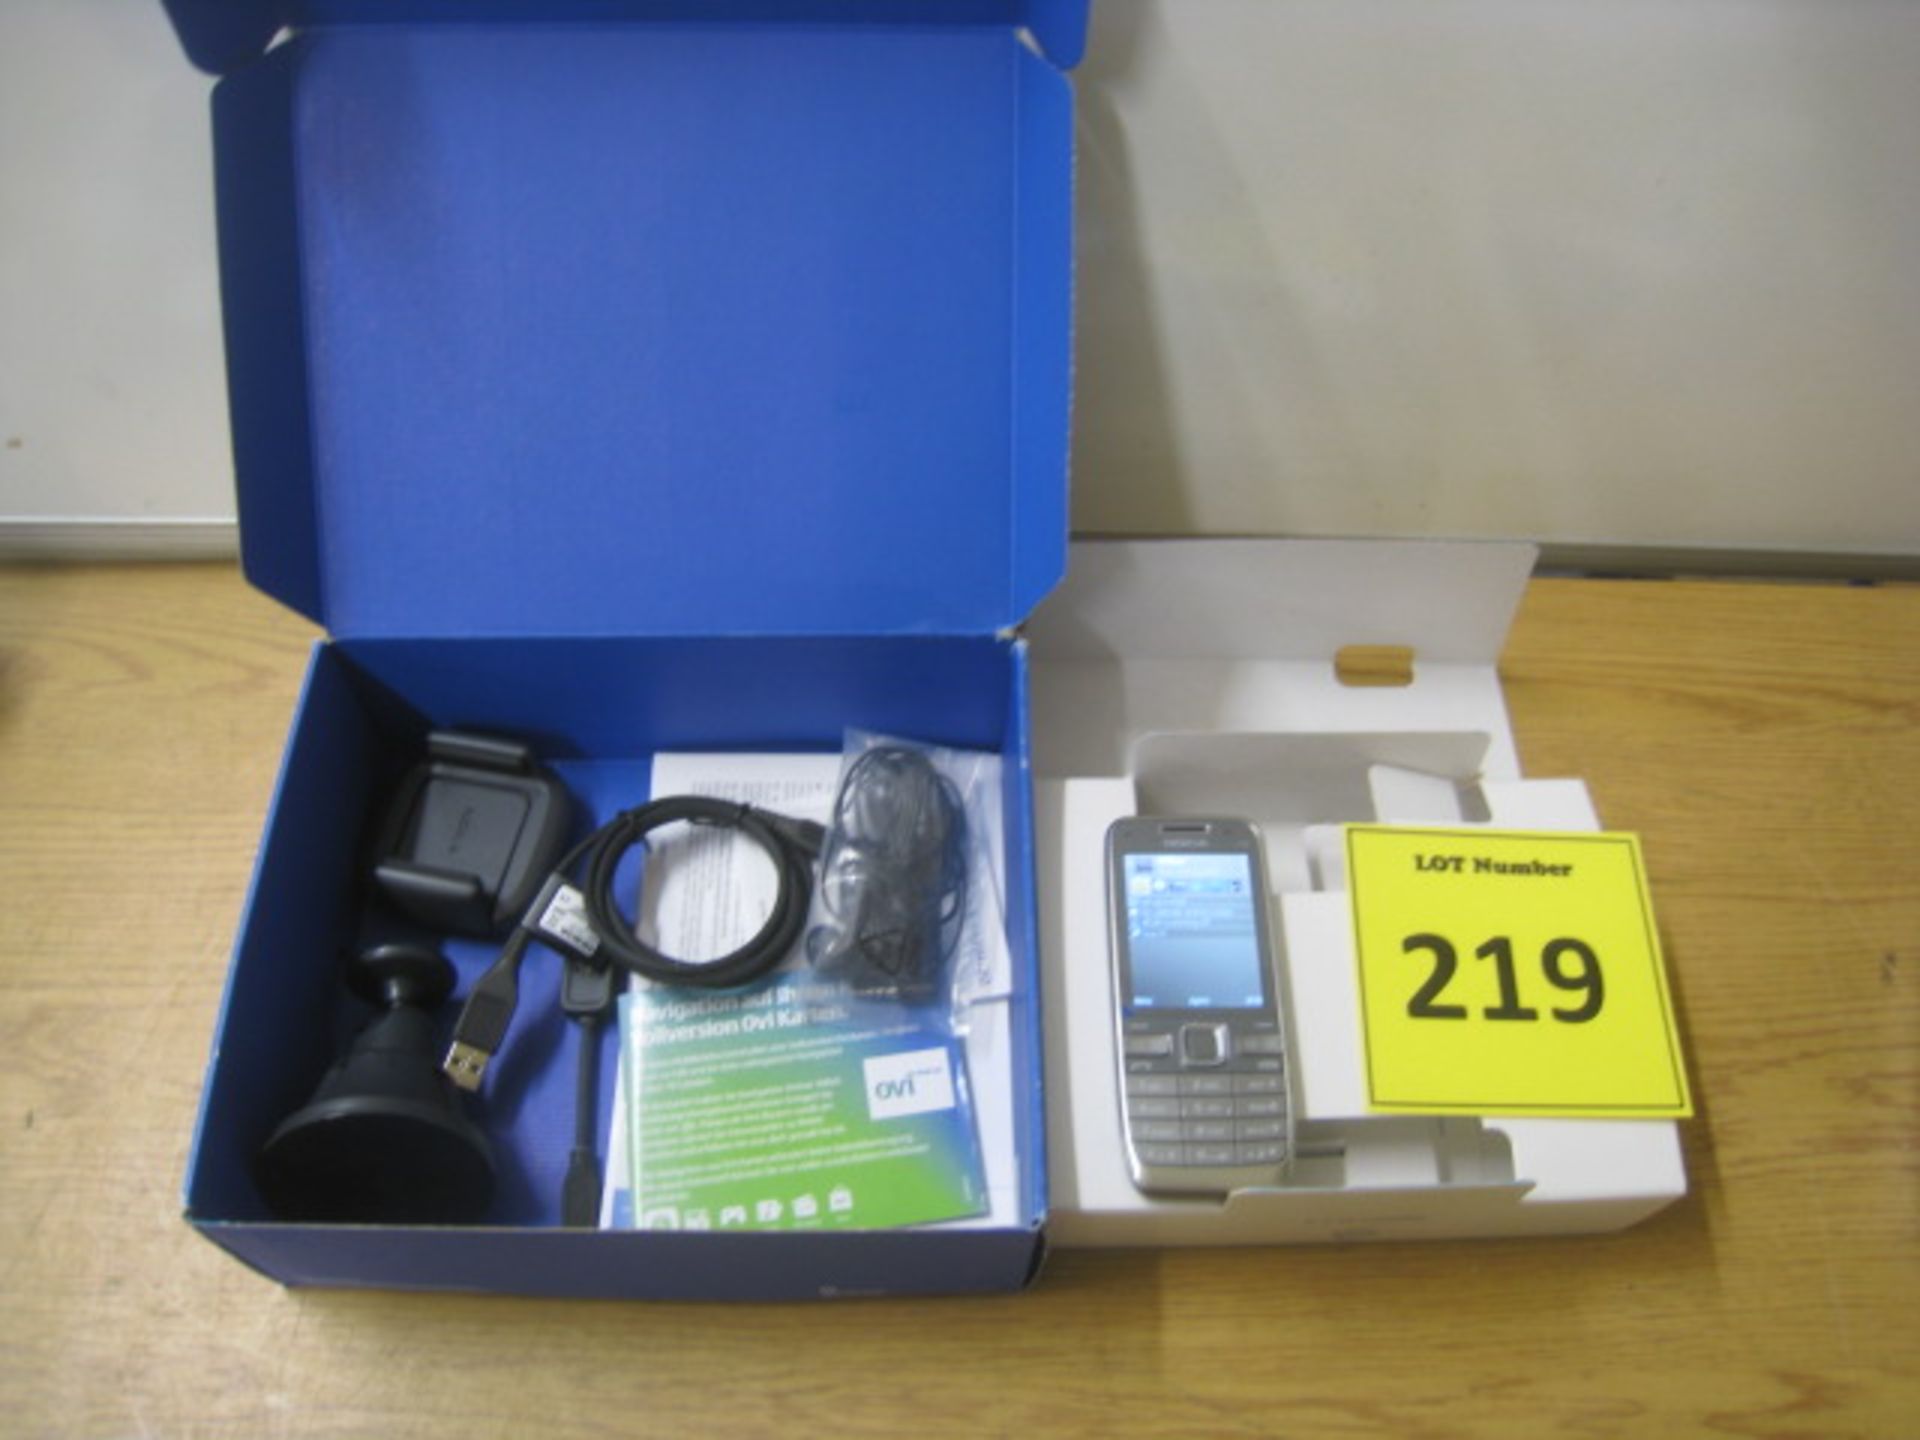 NOKIA E52 SMARTPHONE. WITH INSTRUCTIONS & CARMOUNT, IN BOX - Image 2 of 2